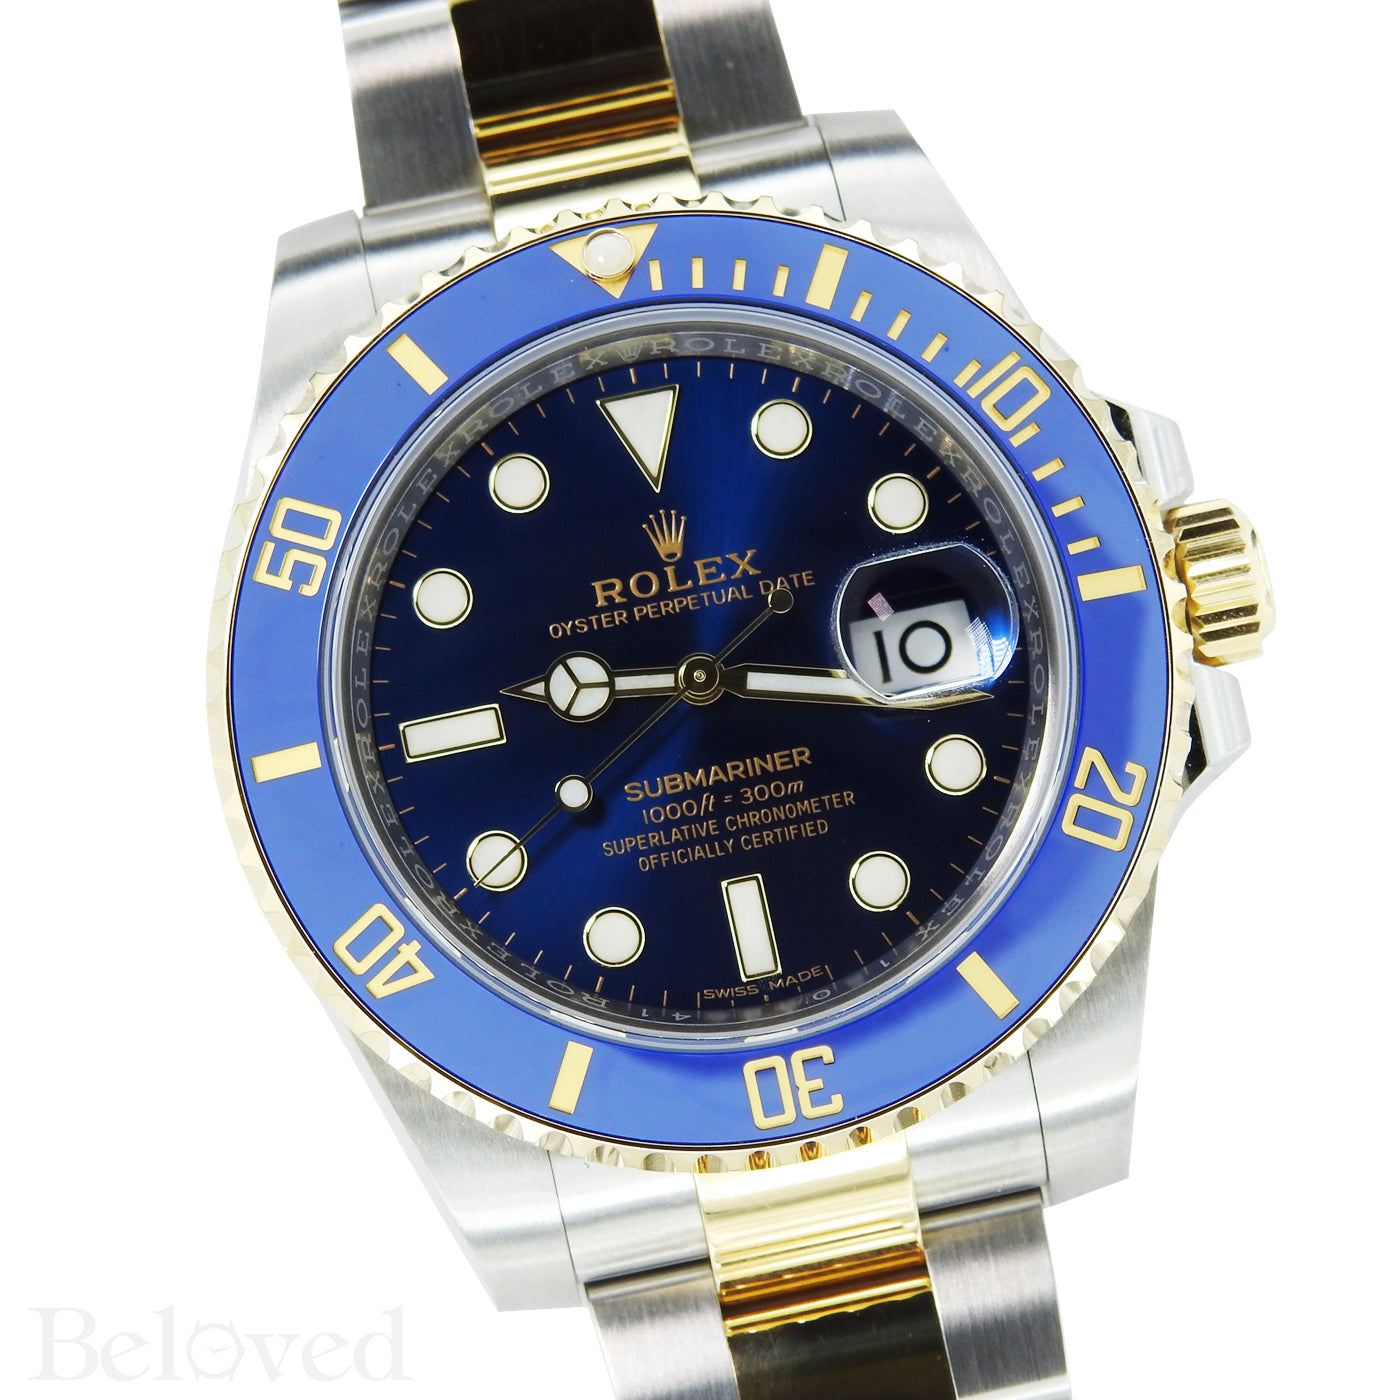 Rolex Submariner 116613 Ceramic Submariner Complete with Rolex Box and Rolex Five Year Warranty Card Image 2